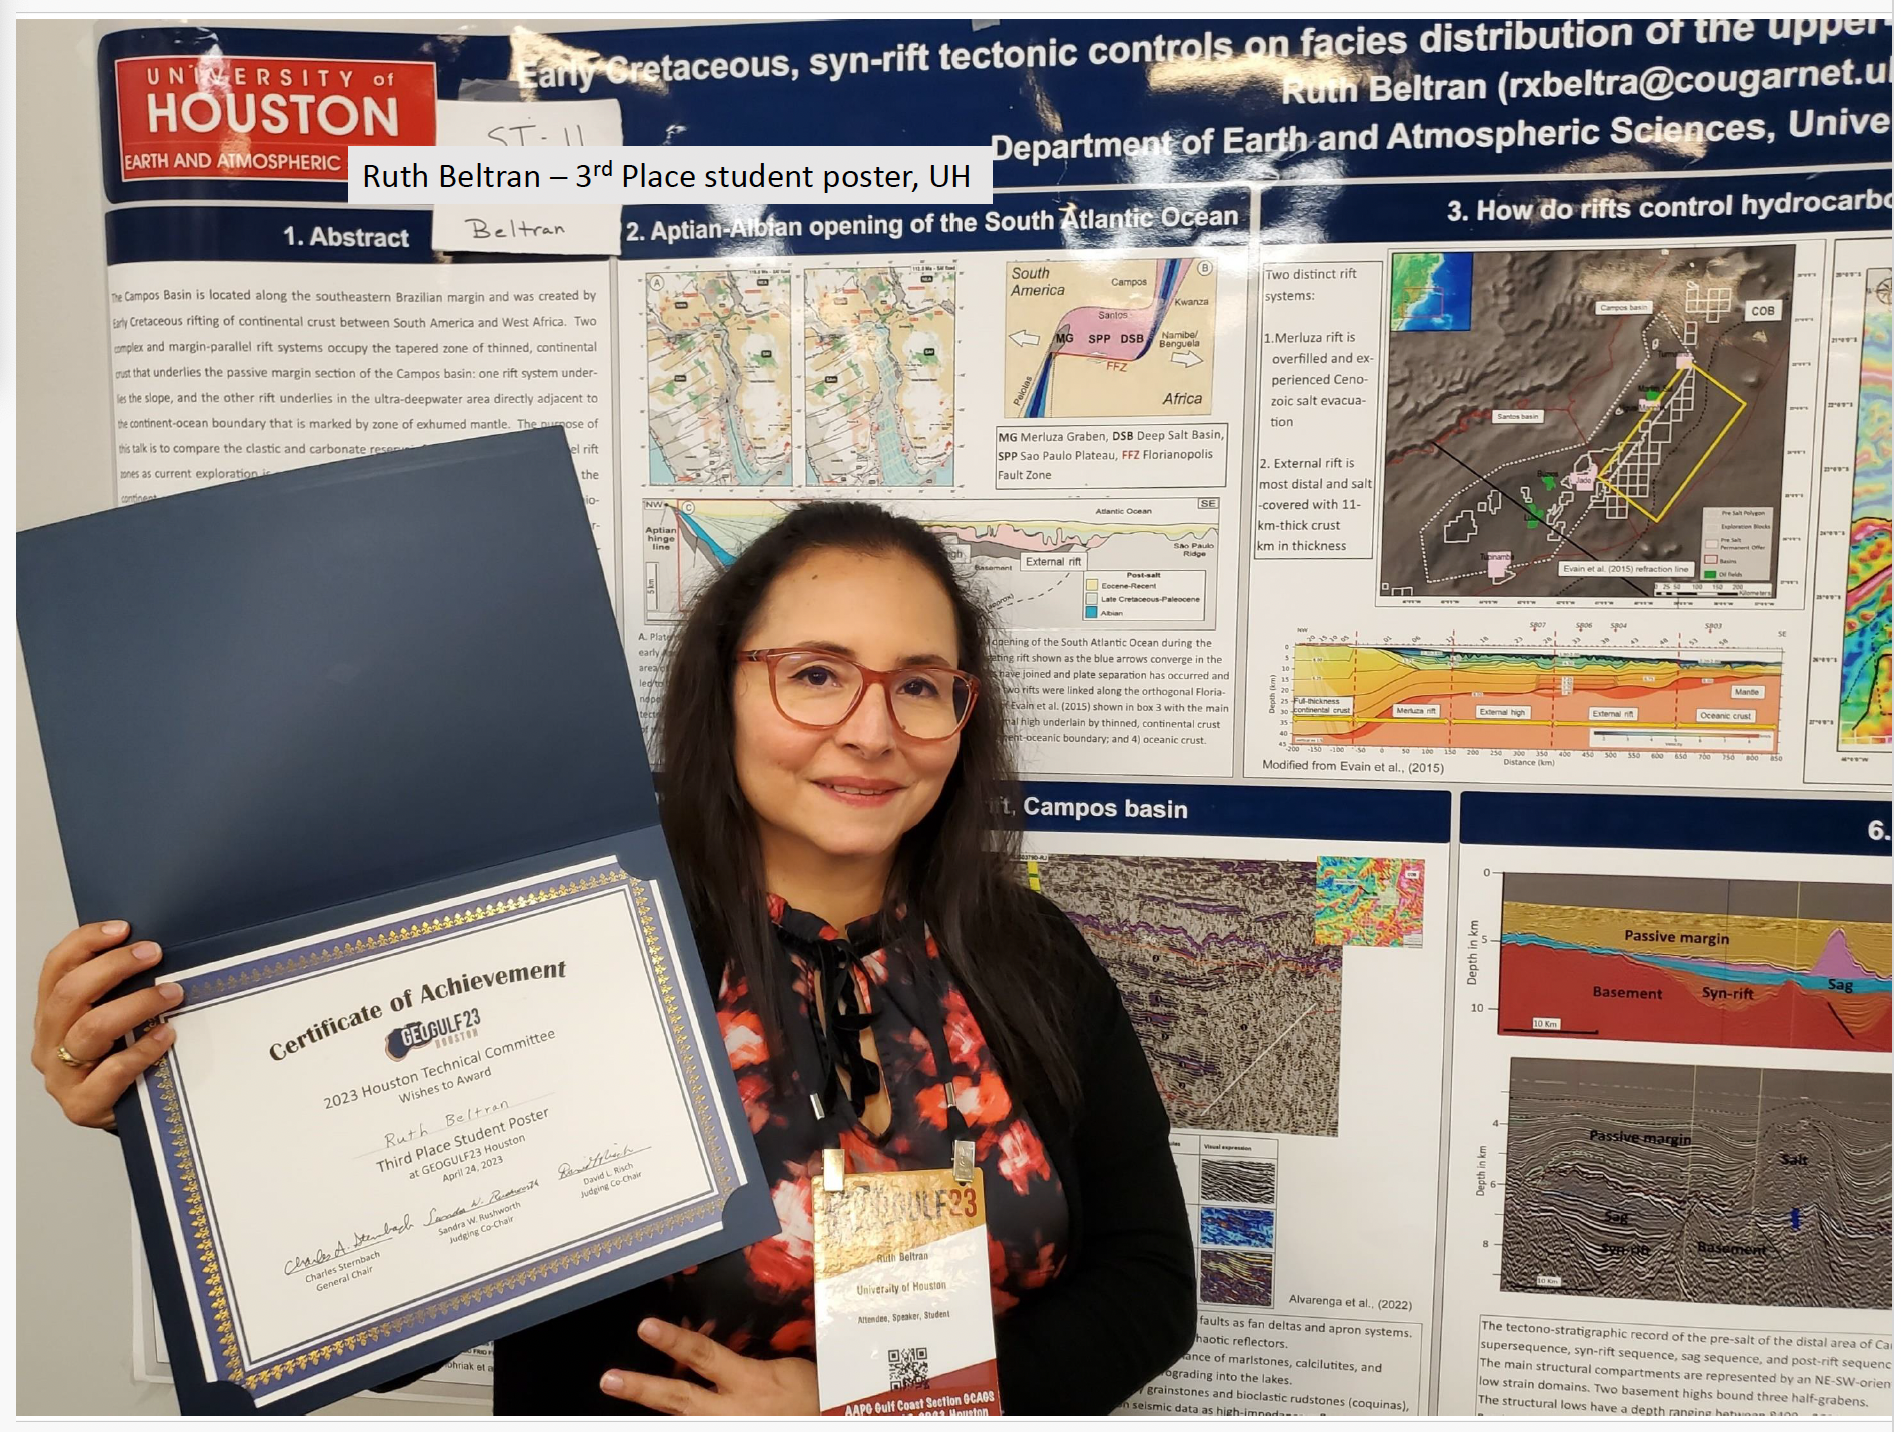 Ruth Beltran wins 3rd Place in the Student Poster Competition at GeoGulf23